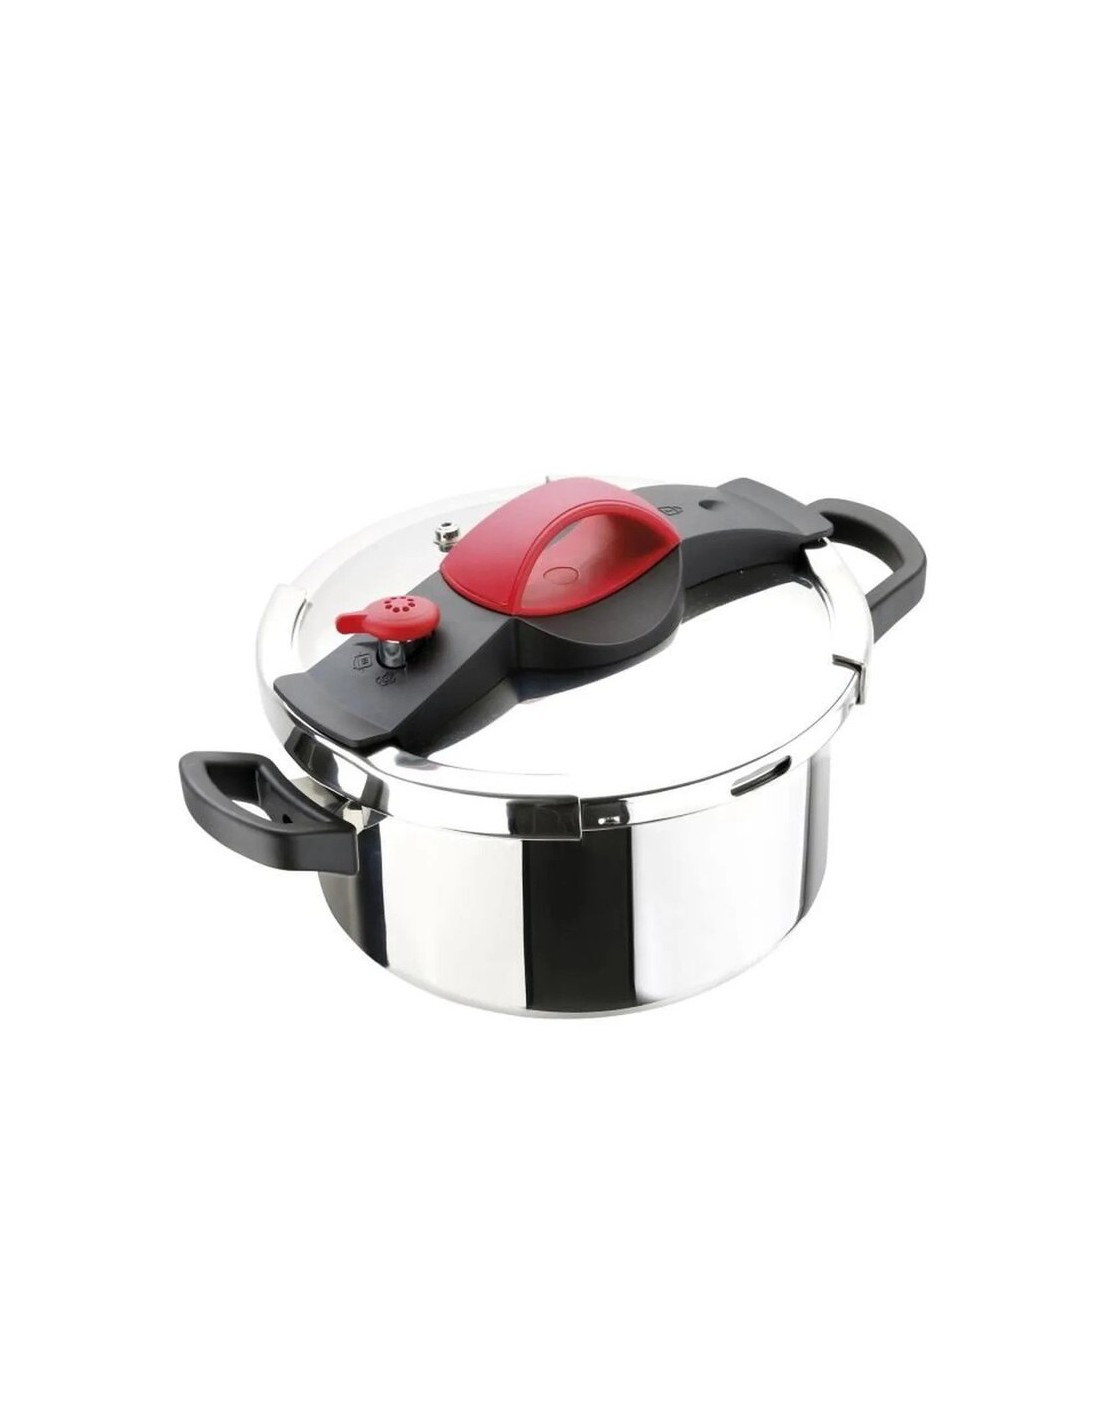 Cocotte Sitram Sitrapro 6 Litres Rouge + panier silicone - 711162